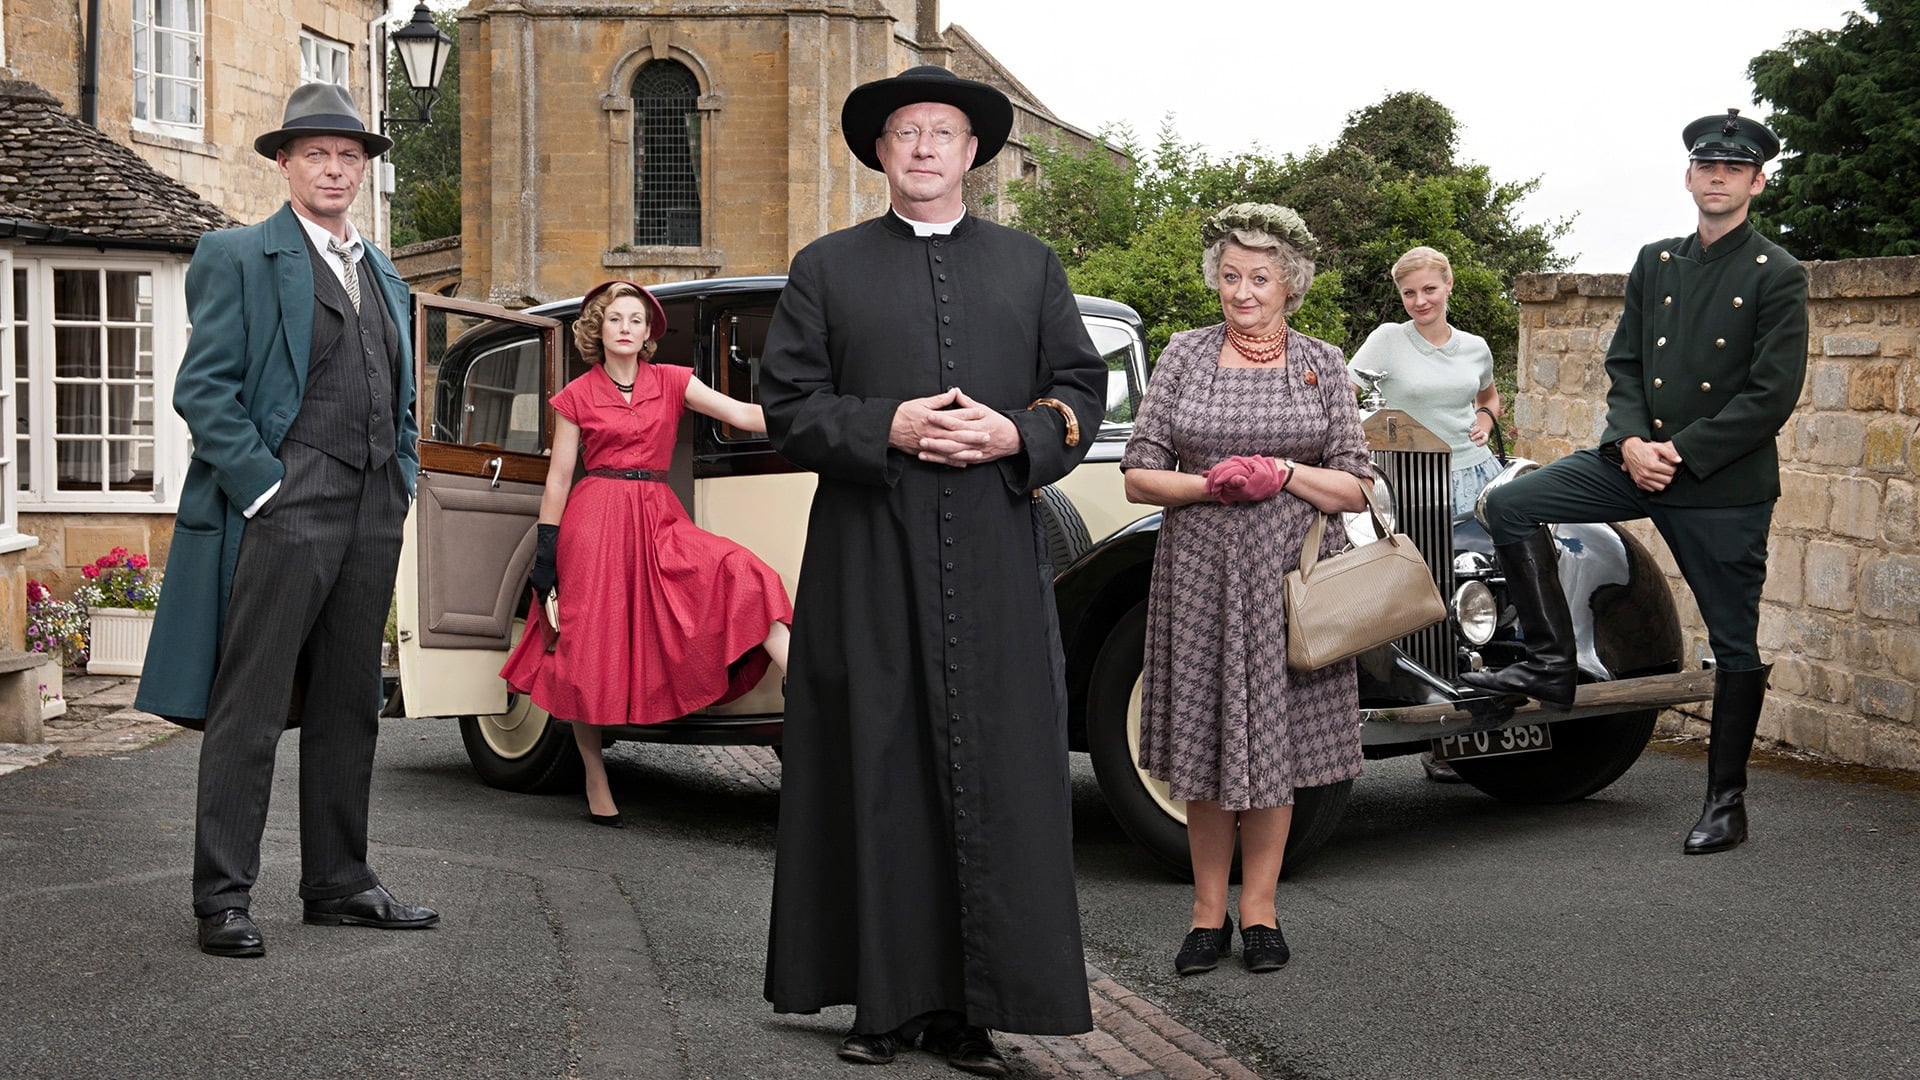 Father Brown - Series 5